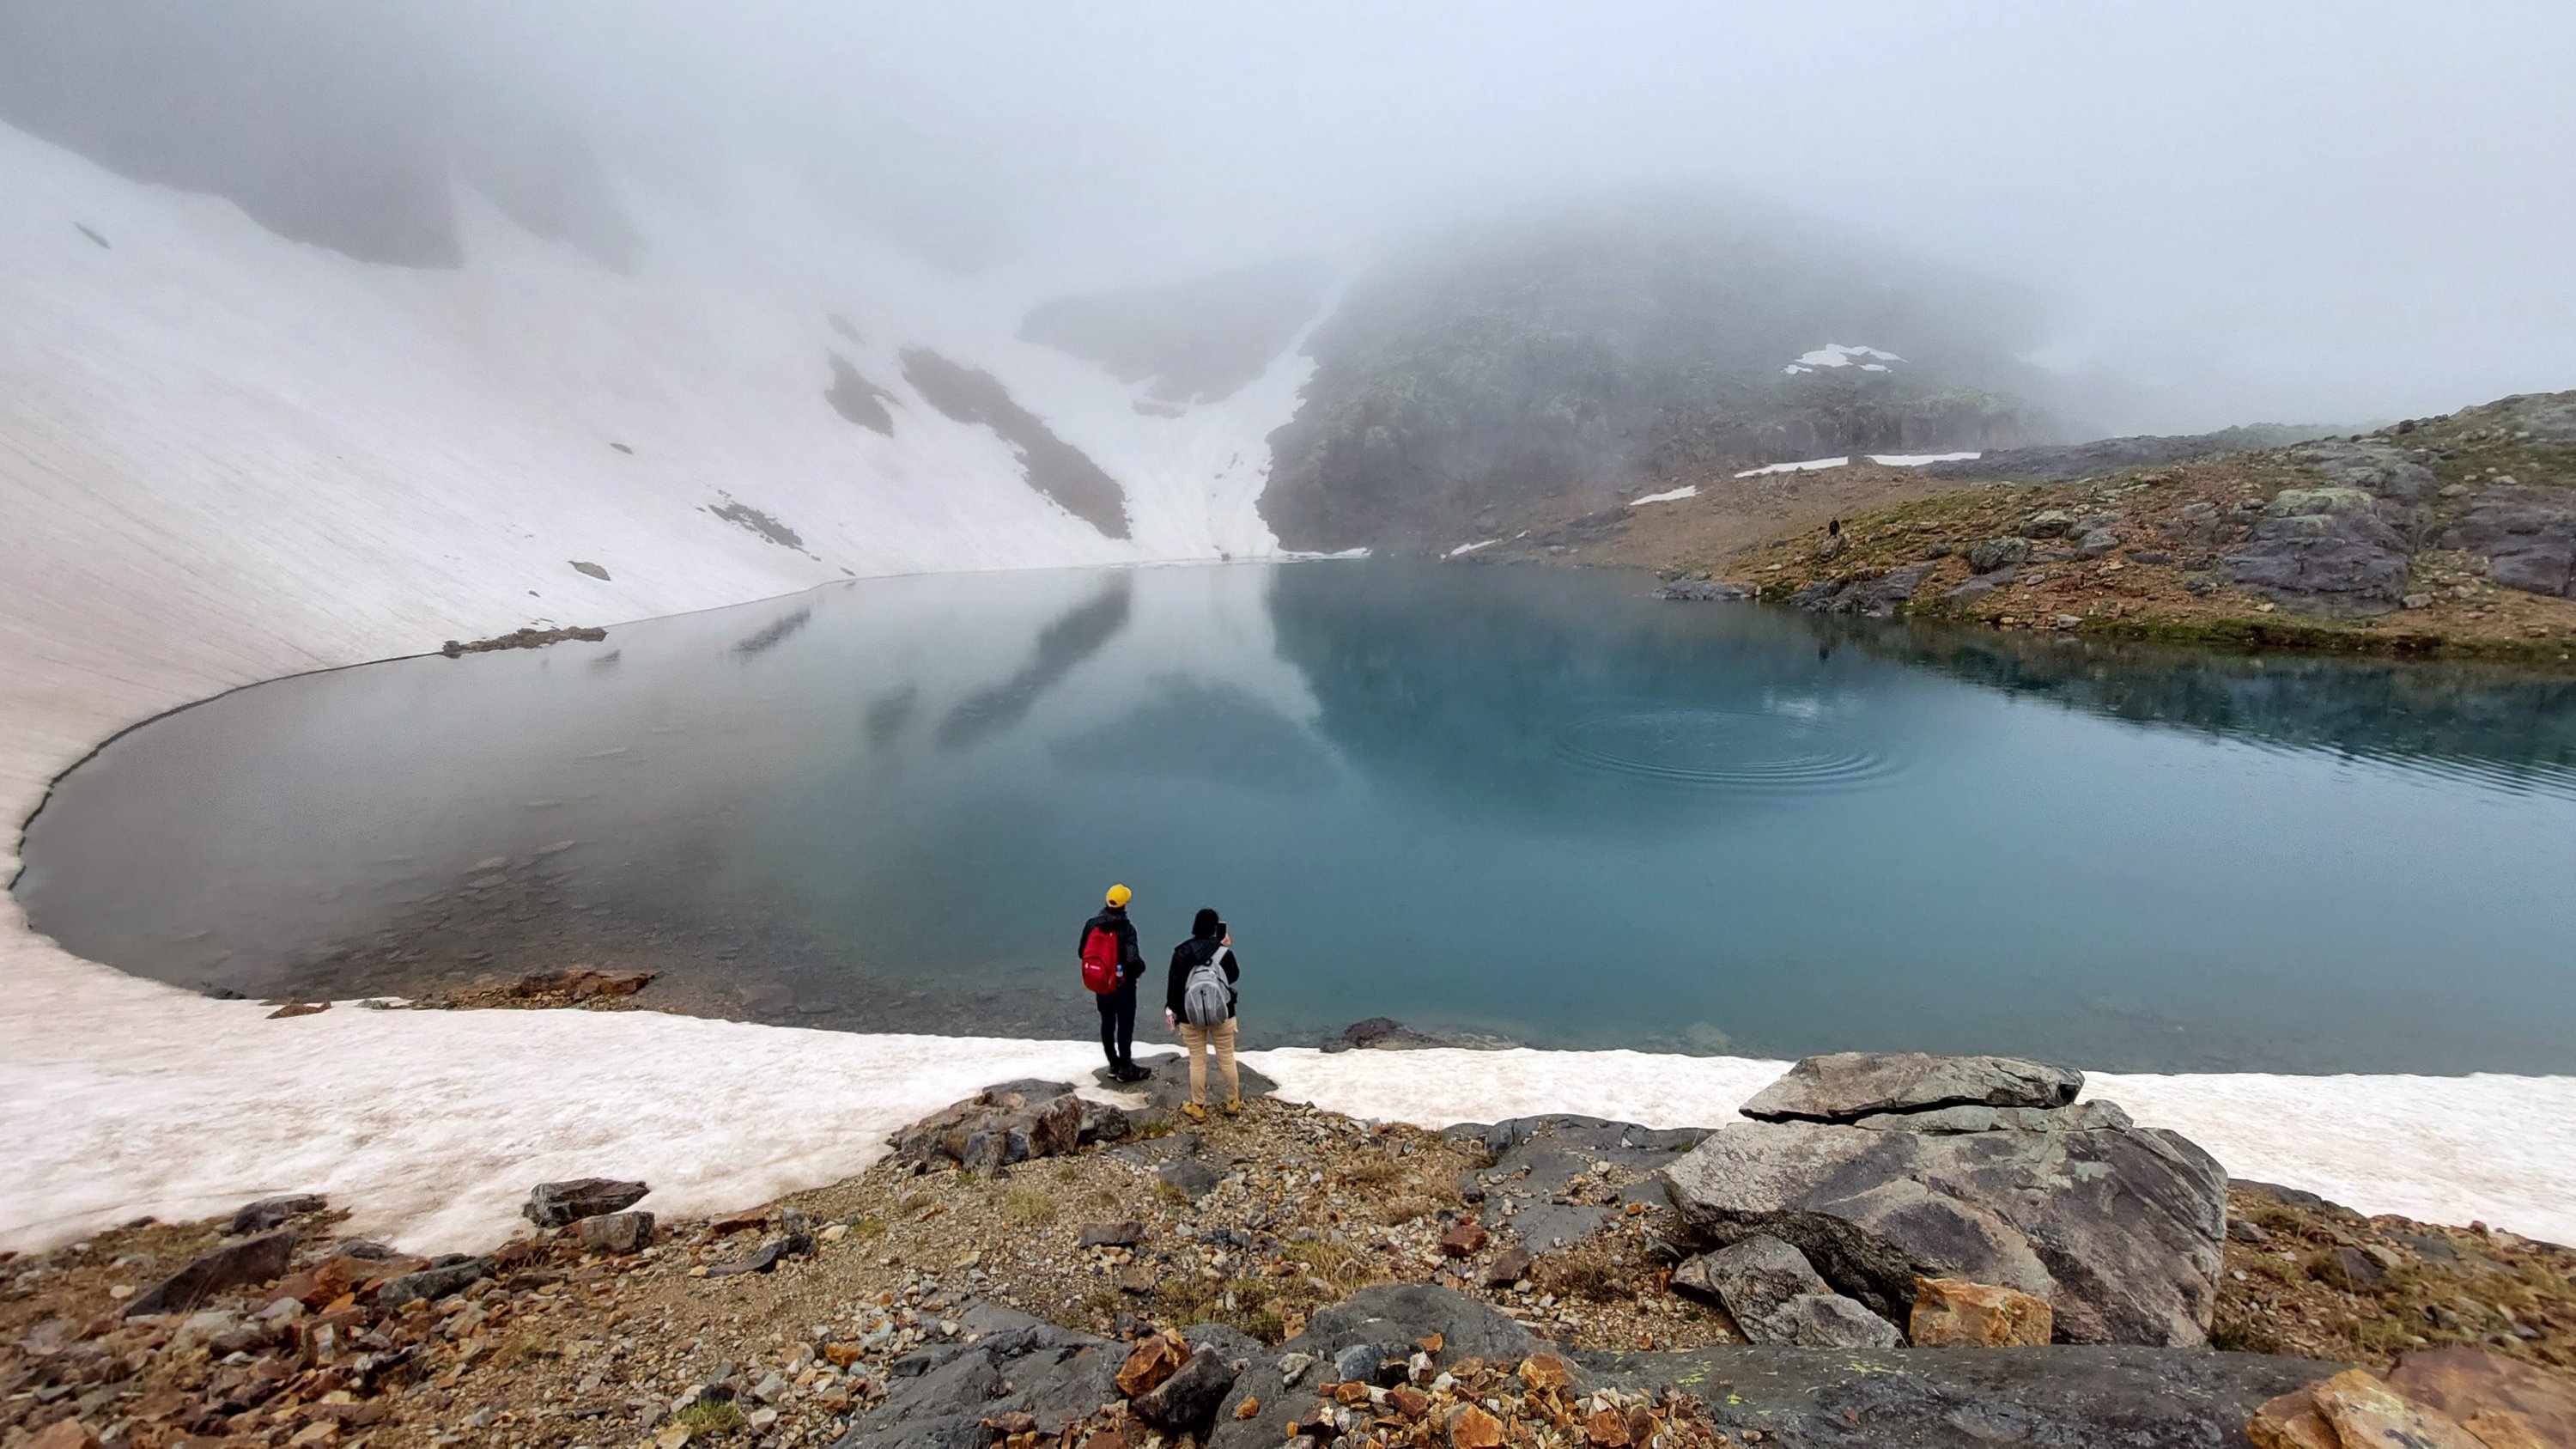 Artabel Lakes Nature Park, also called as "the summit where light meets water," offers a stunning view for its visitors, Gümüşhane, Turkey, June 27, 2022. (IHA Photo)